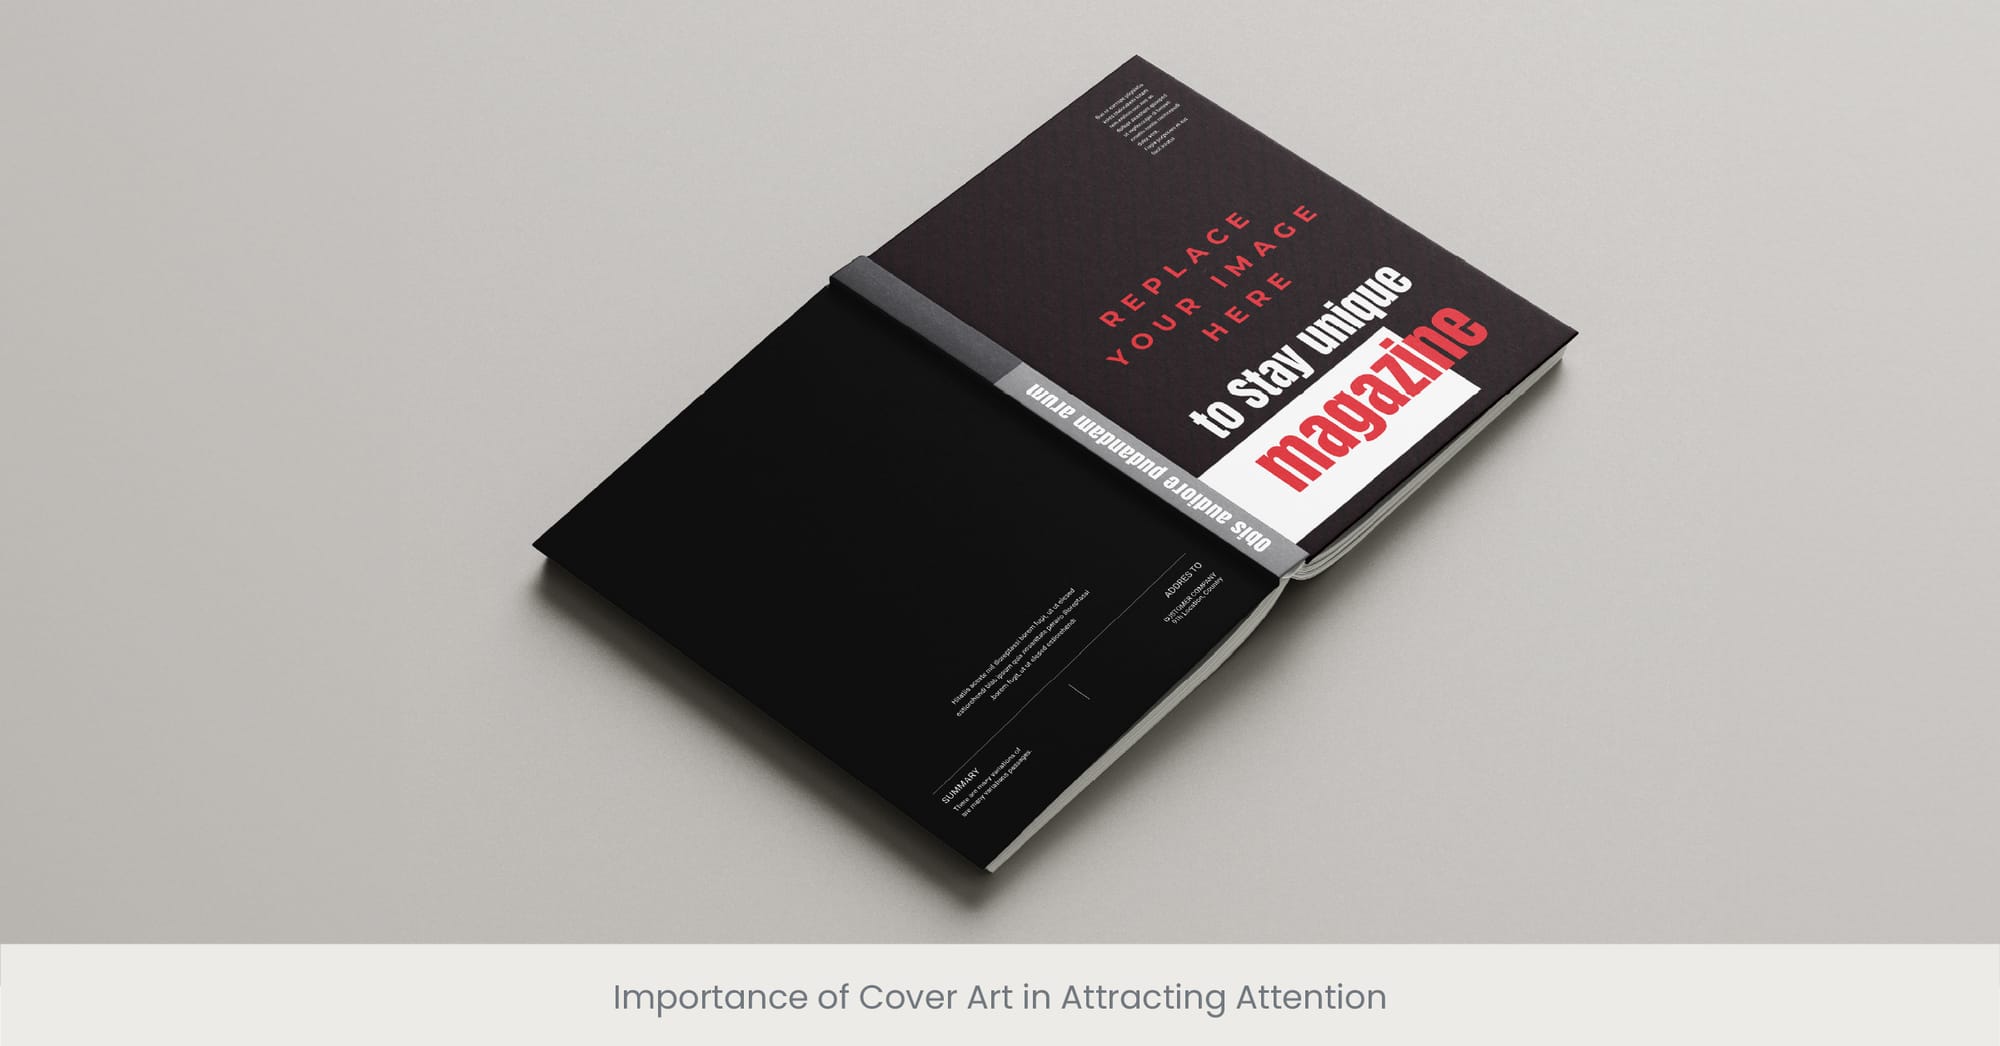 Importance of Cover Art in Attracting Attention